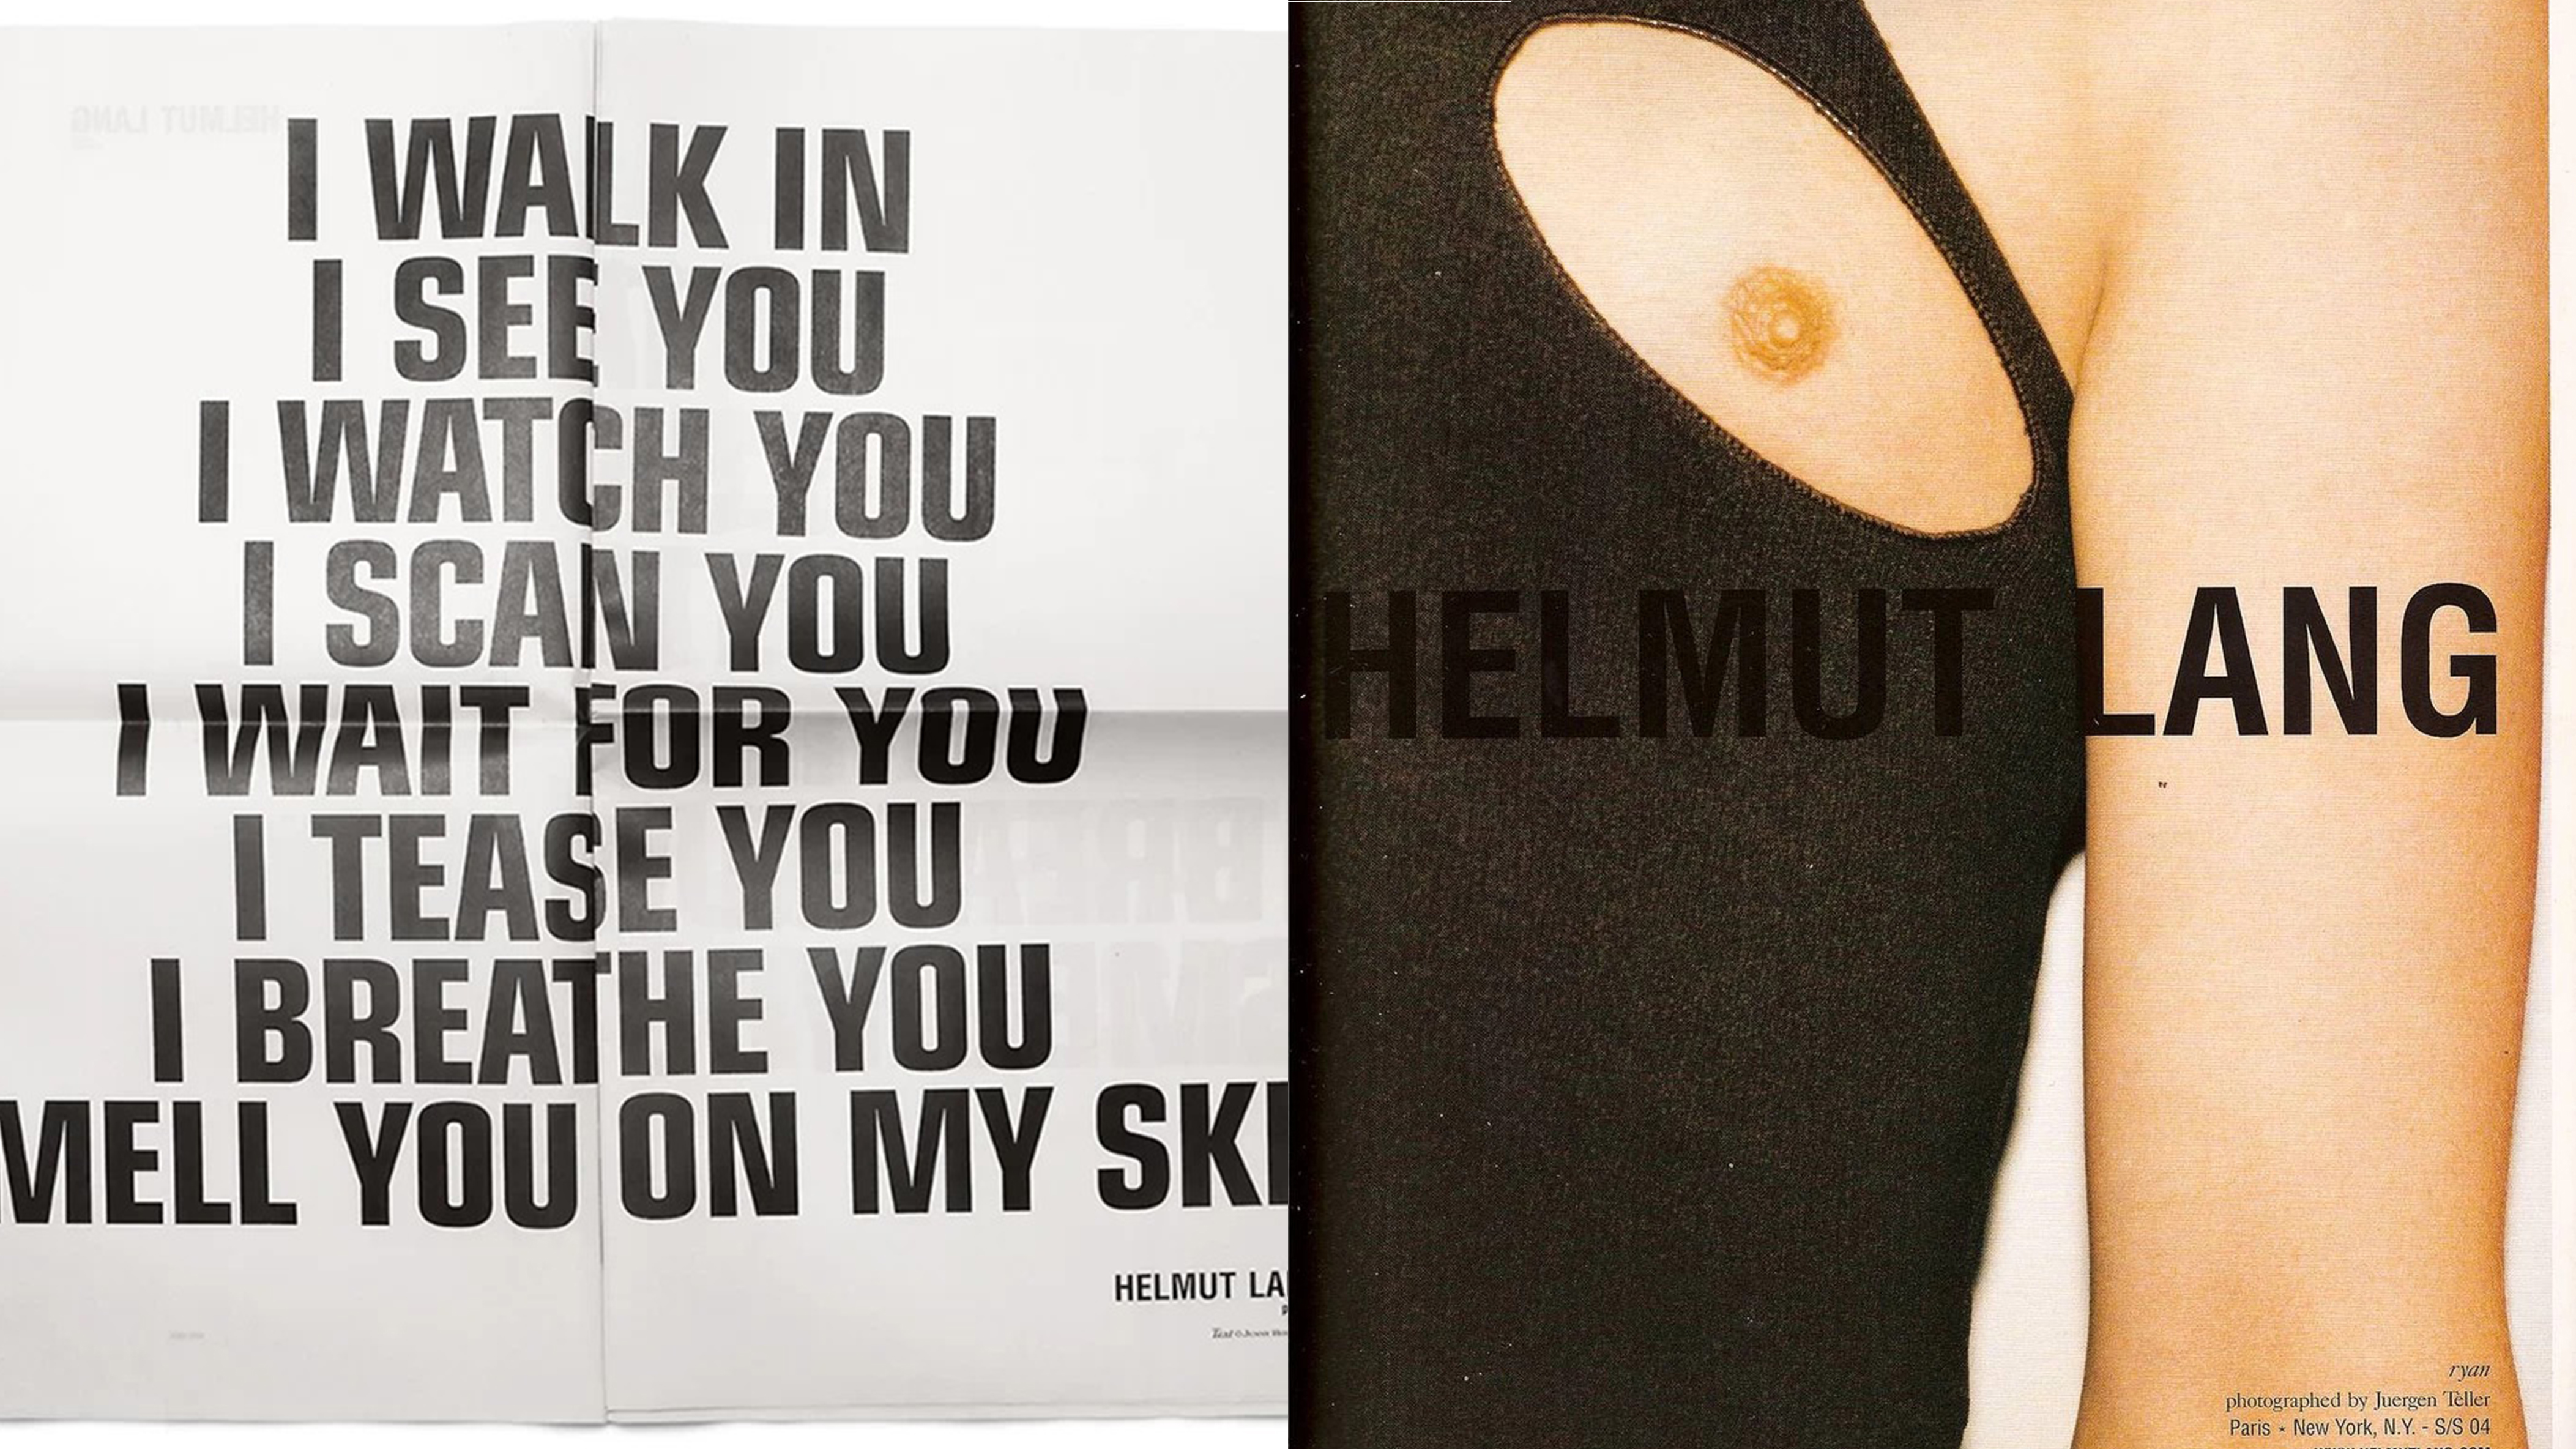 Exclusive: Inside Helmut Lang 2.0, the Re-Invention of the 1990s